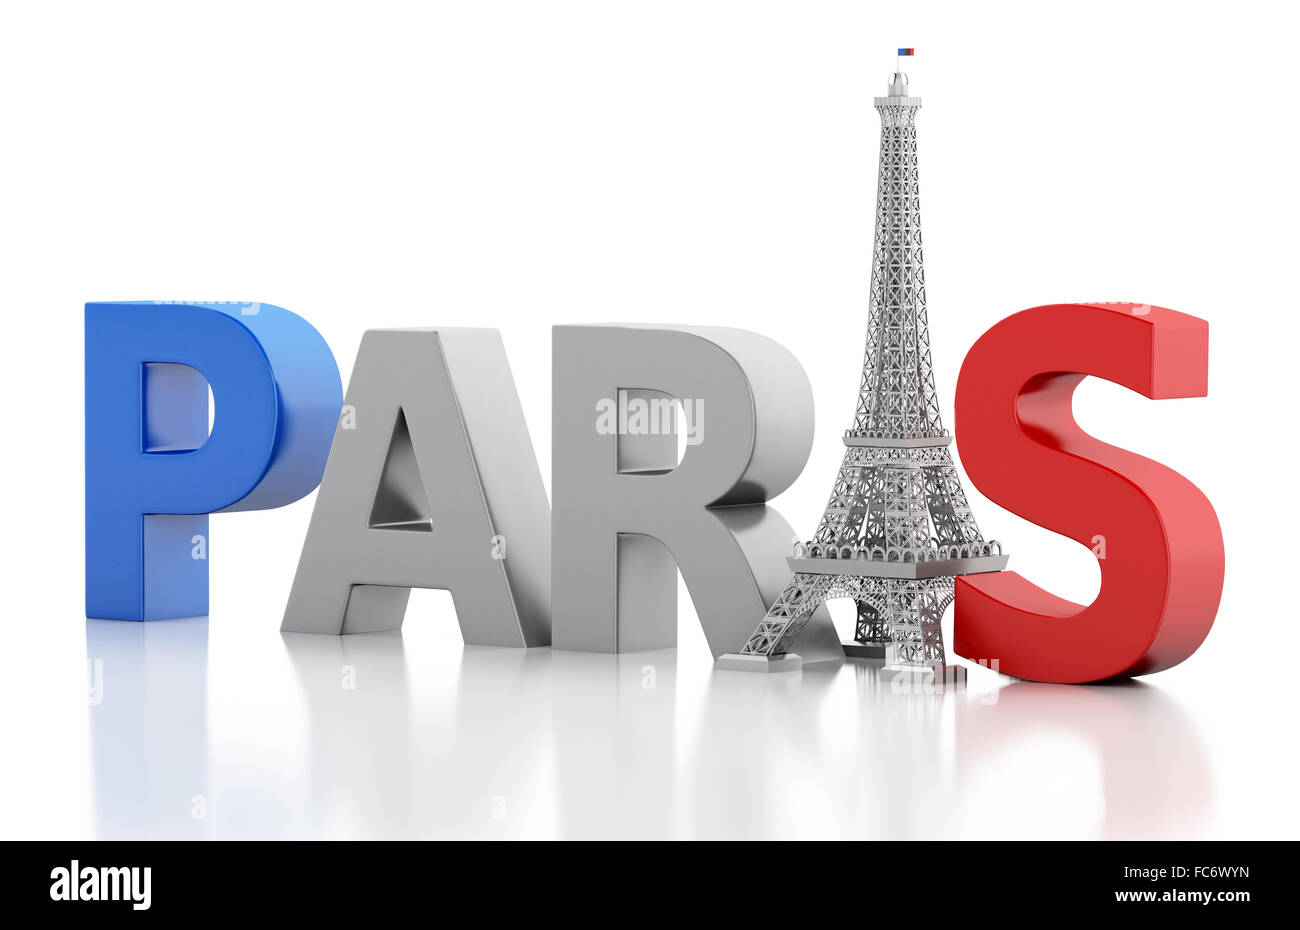 3d Paris word with eiffel tower. Stock Photo